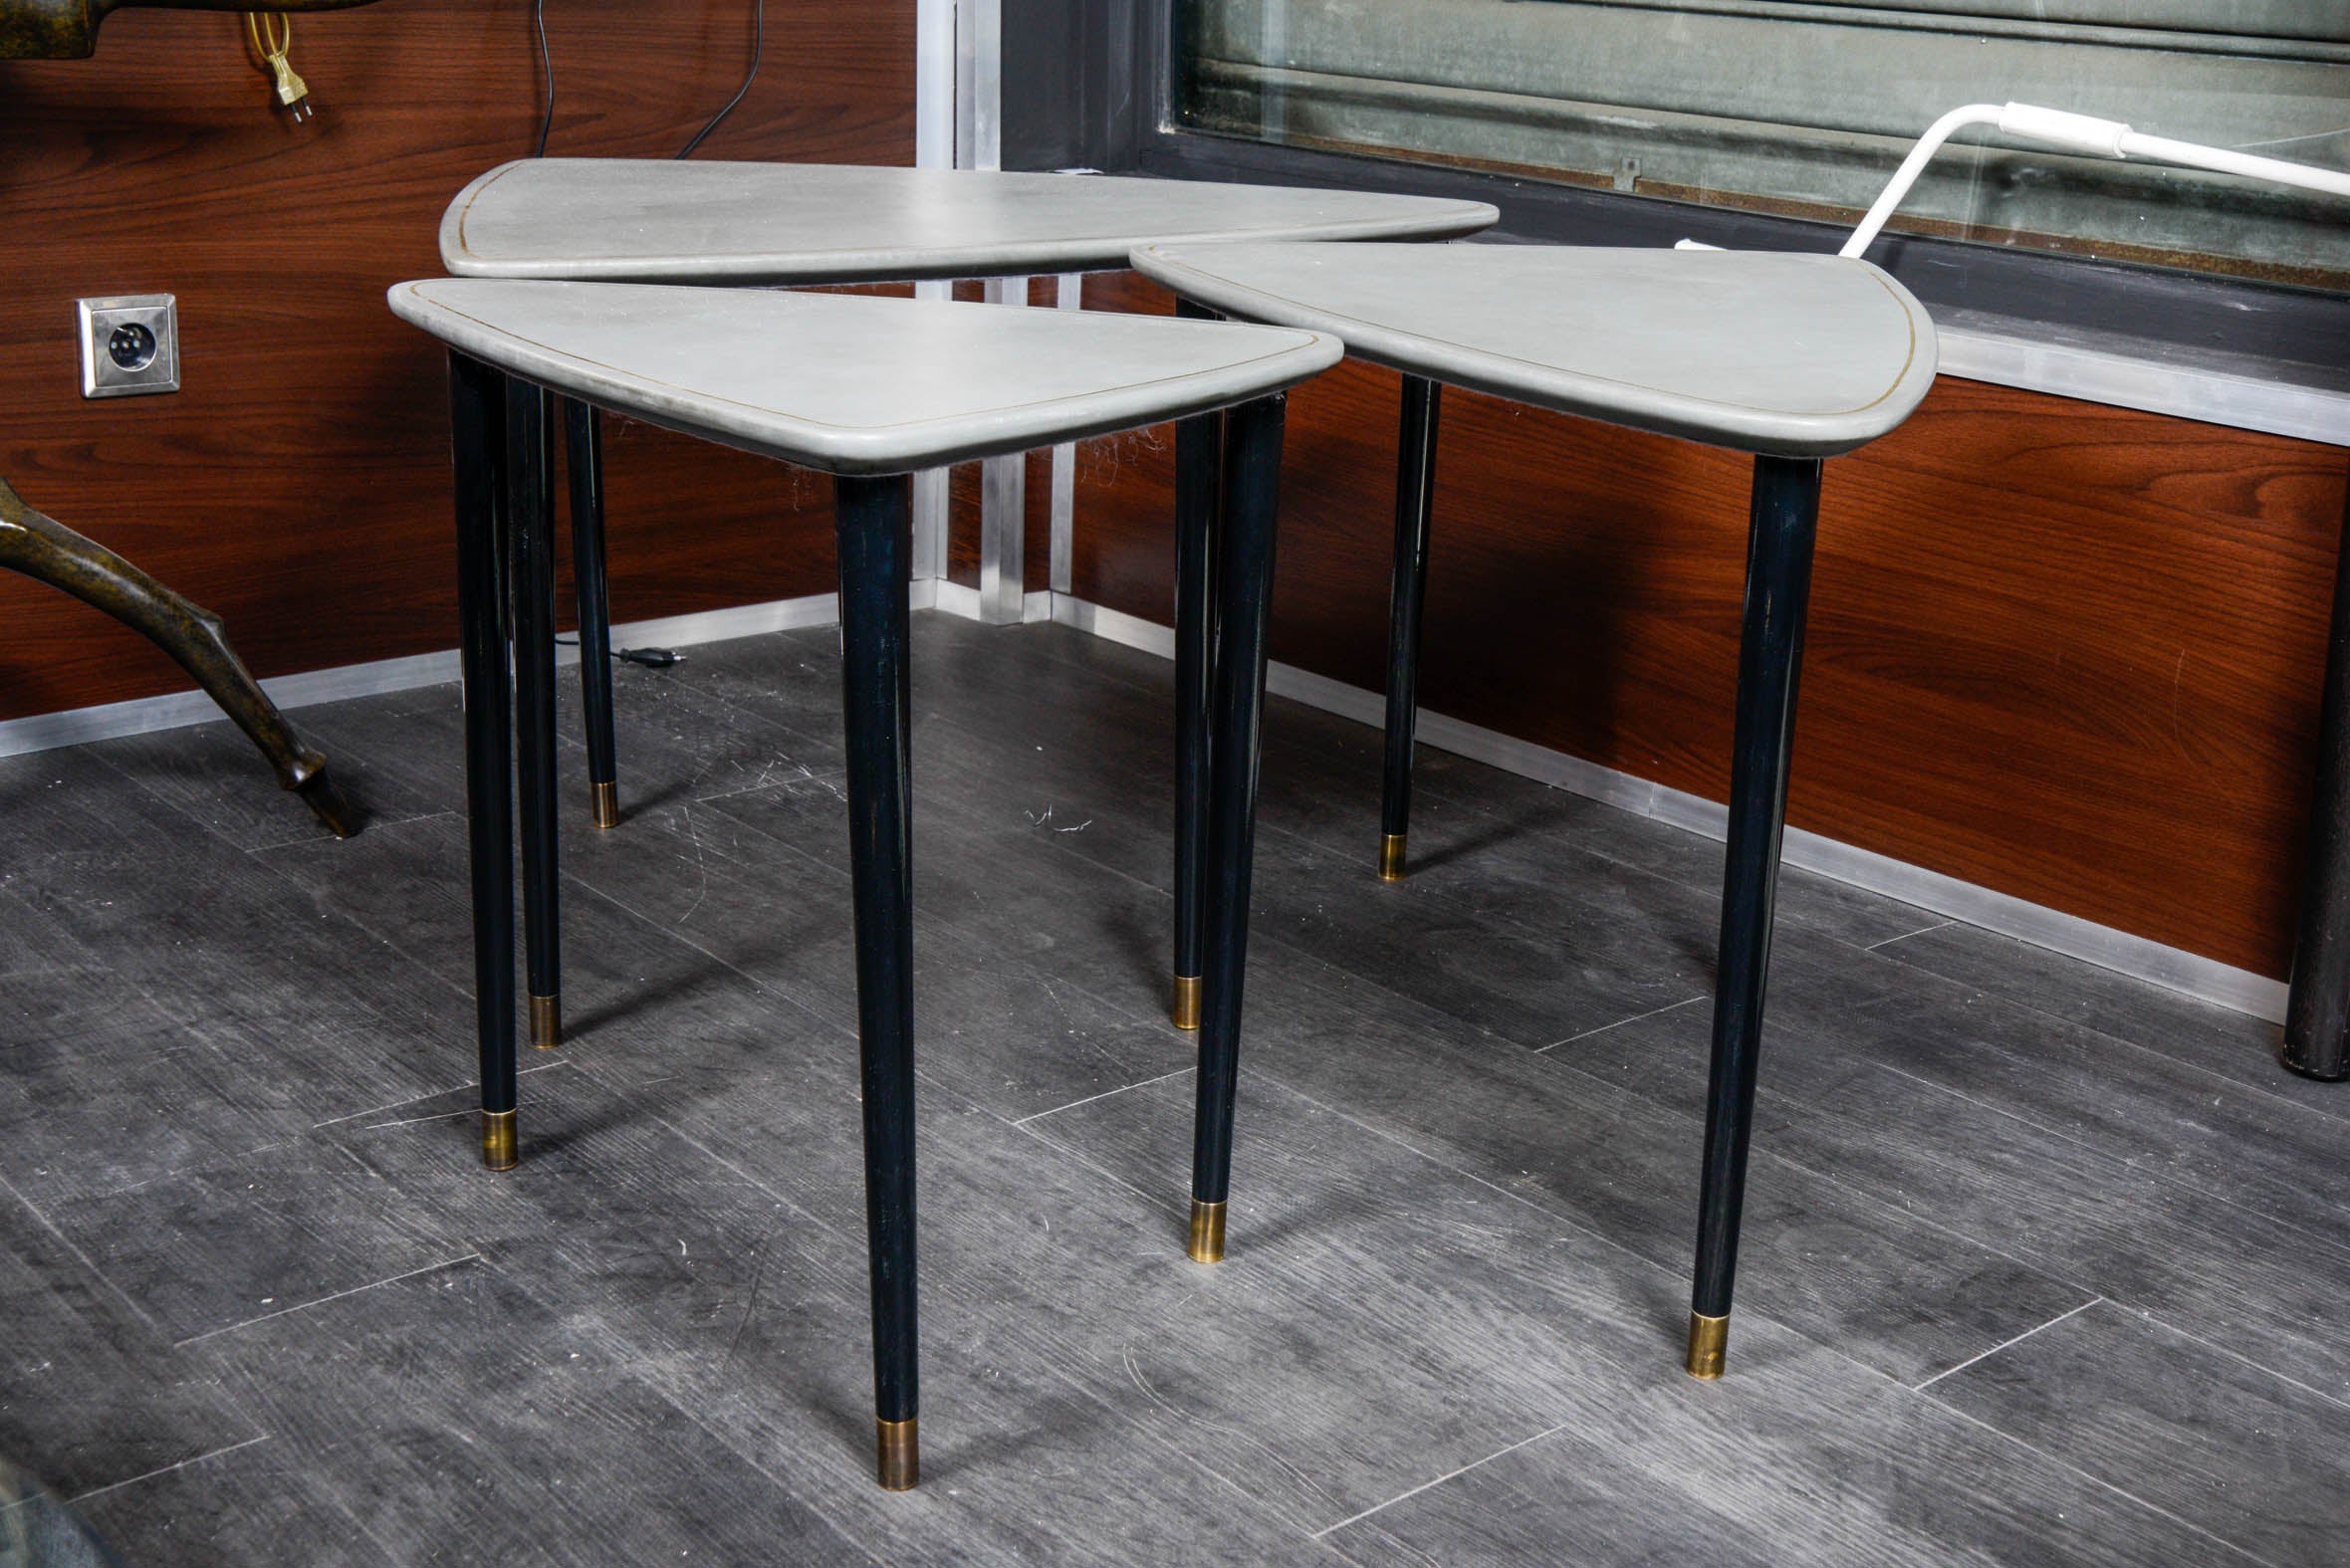 Set of tables in leather and lacquered wood feet.
1- 75 x 45 H 60 cm.
2- 62 x 50 H 50 cm.
3- 40 x 50 H 50 cm.